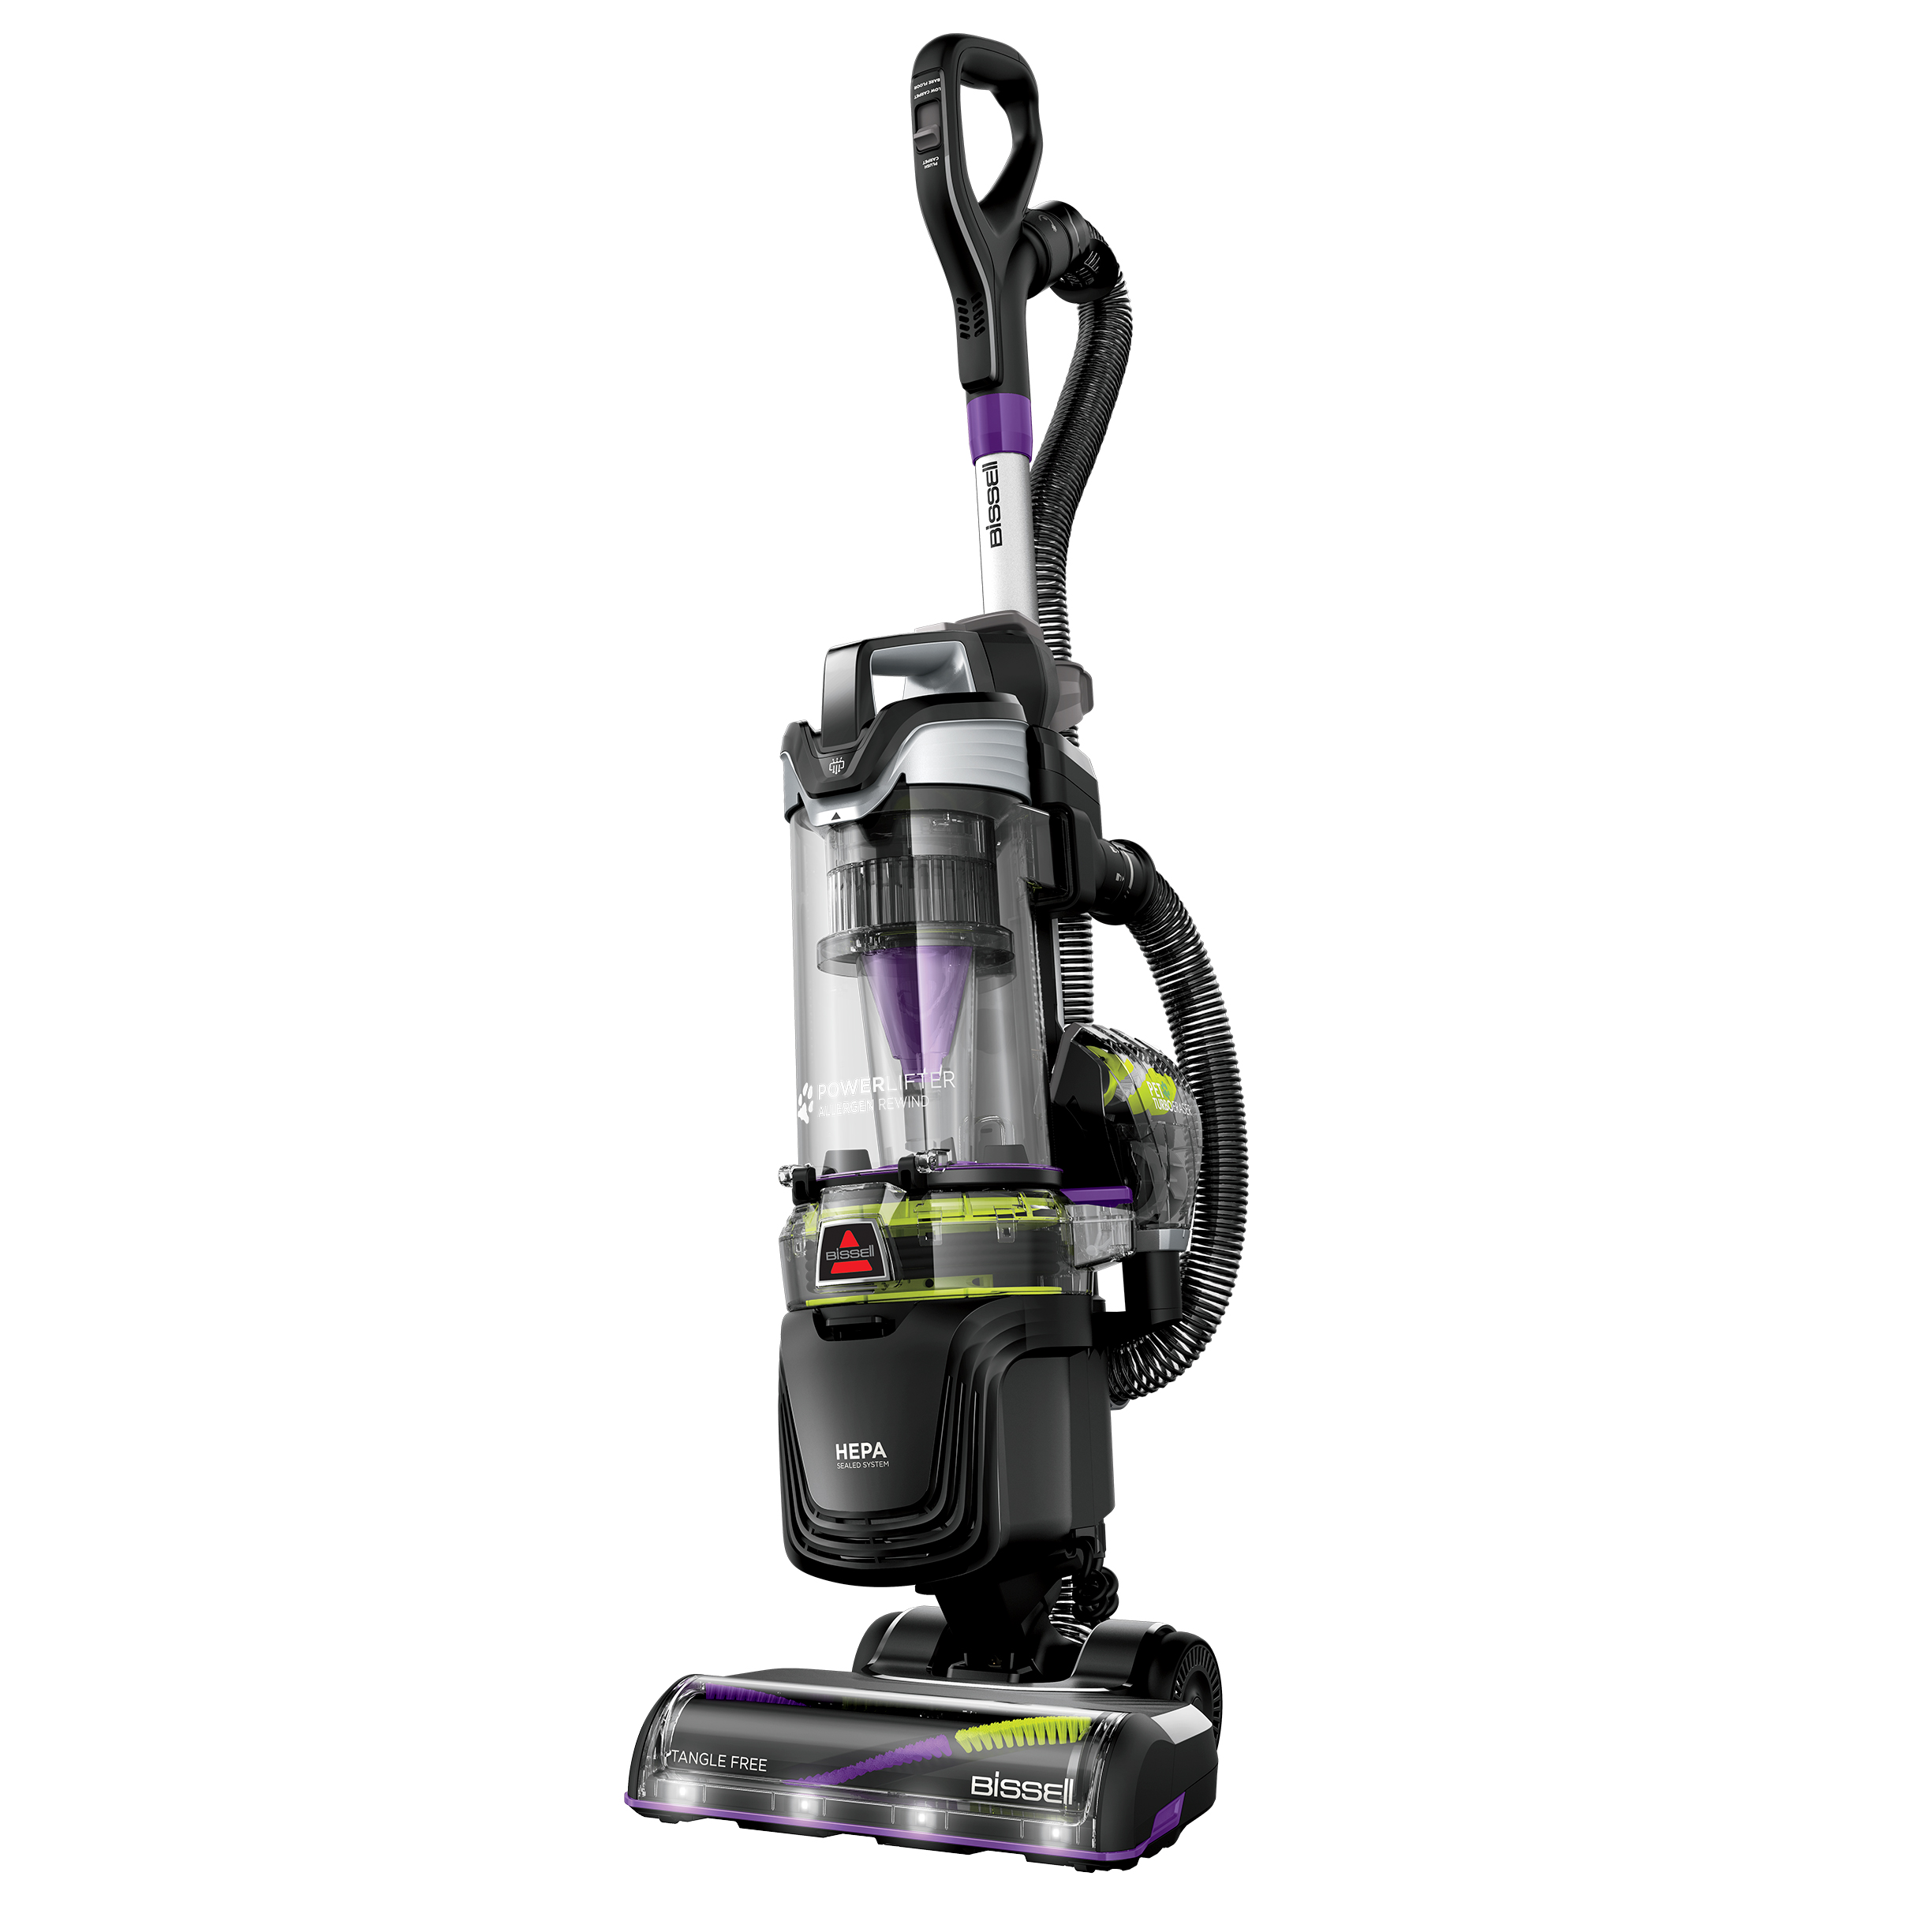 BISSELL PowerLifter Pet Rewind Bagless Upright Vacuum 3404 - image 1 of 8